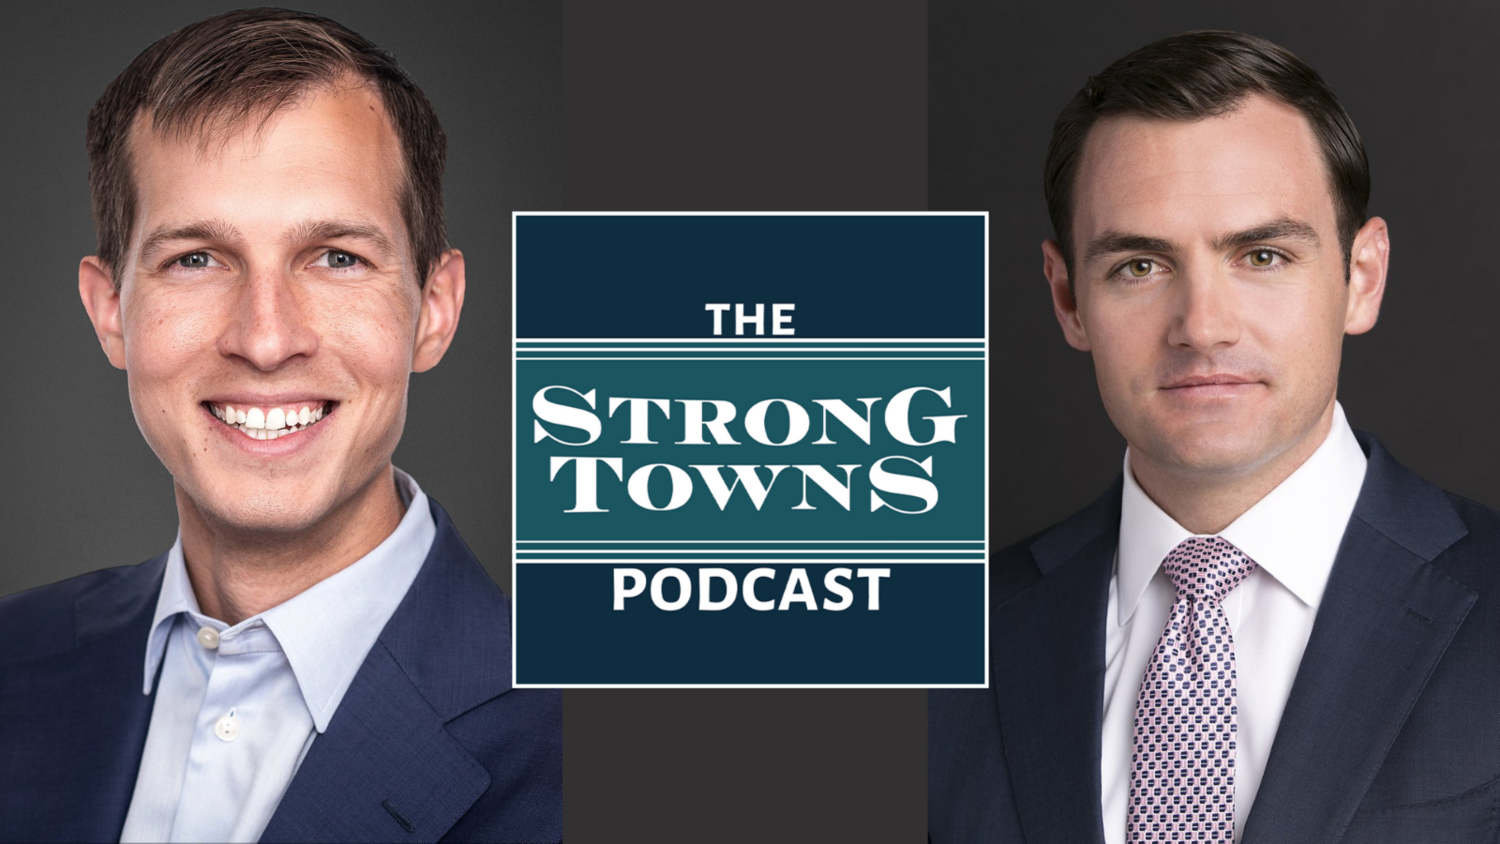 Rep. Jake Auchincloss &amp; Rep. Mike Gallagher: How Congress Can Support Local Leaders and Get the Economy Going (Video)